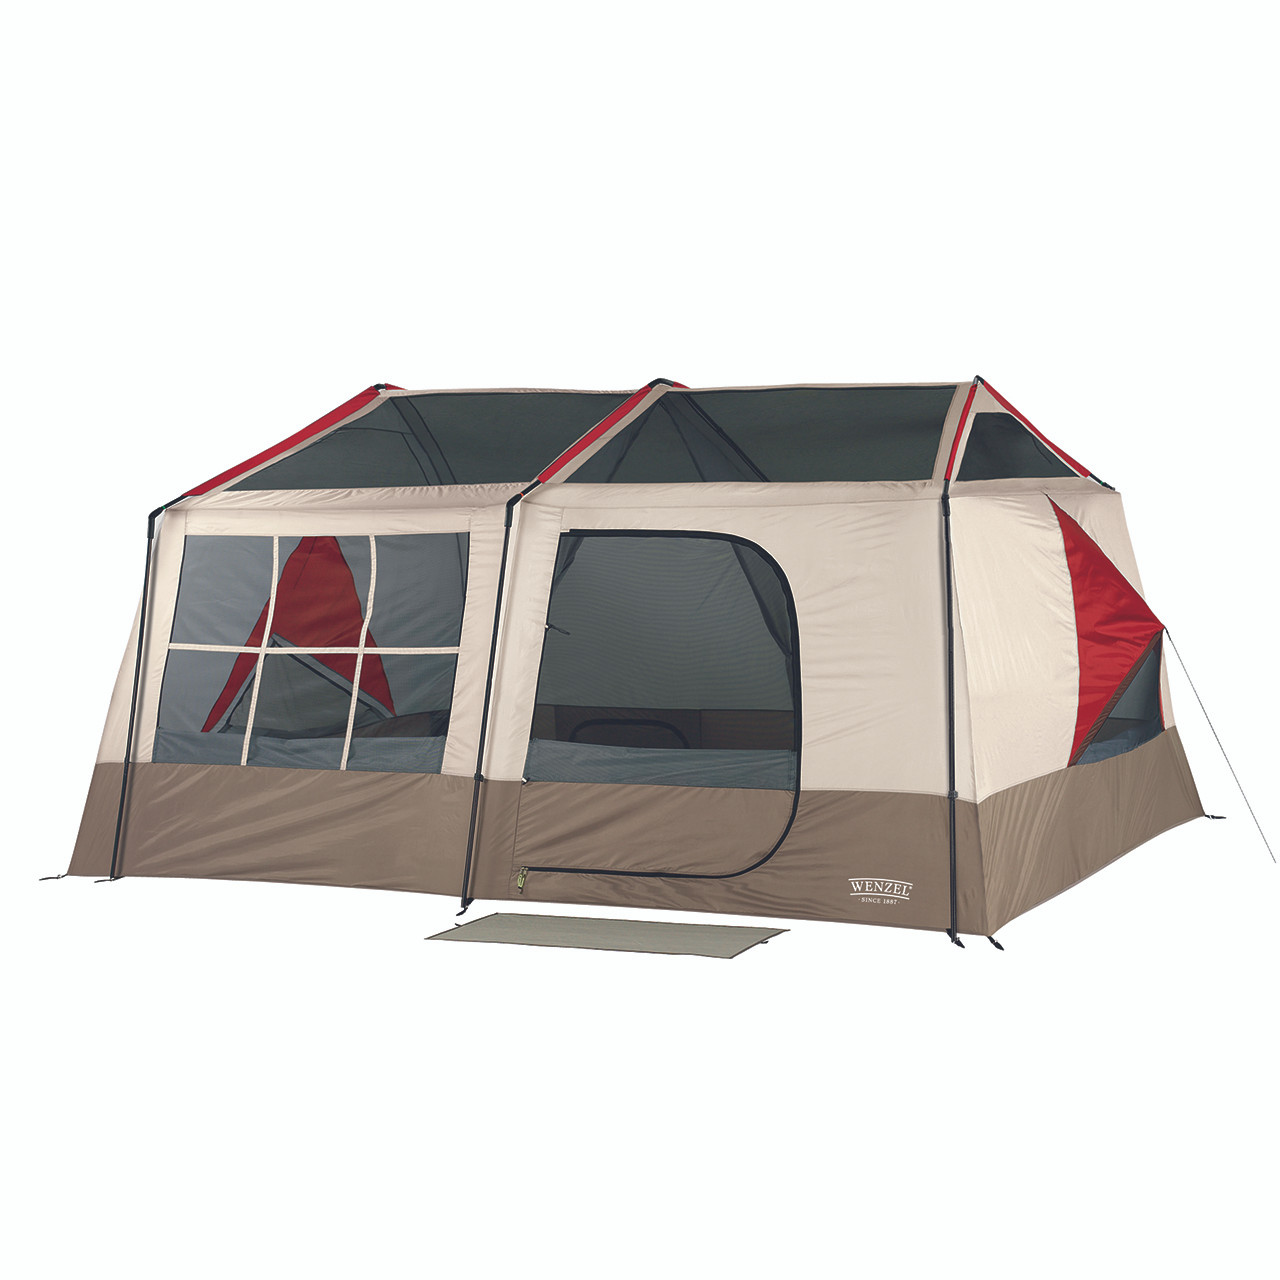 Wenzel Kodiak 9 tent setup without the rain fly on and the main screen door windows open with the side vent open and guy line extended